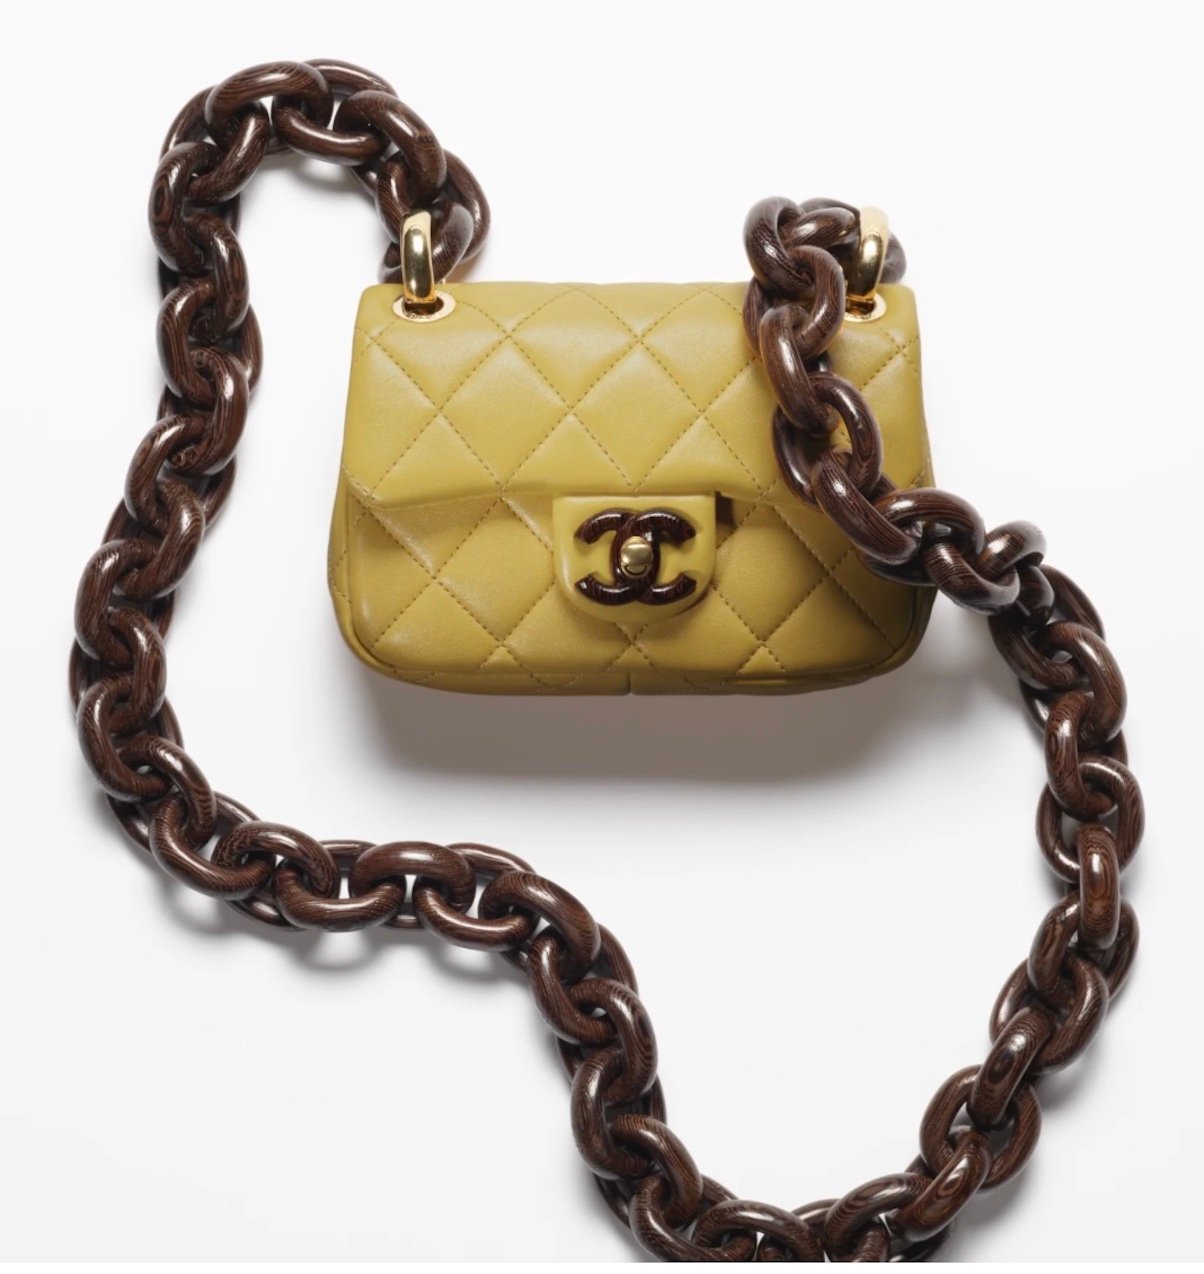 Chanel Fall 2022 Is an Ode to Tweed - PurseBlog